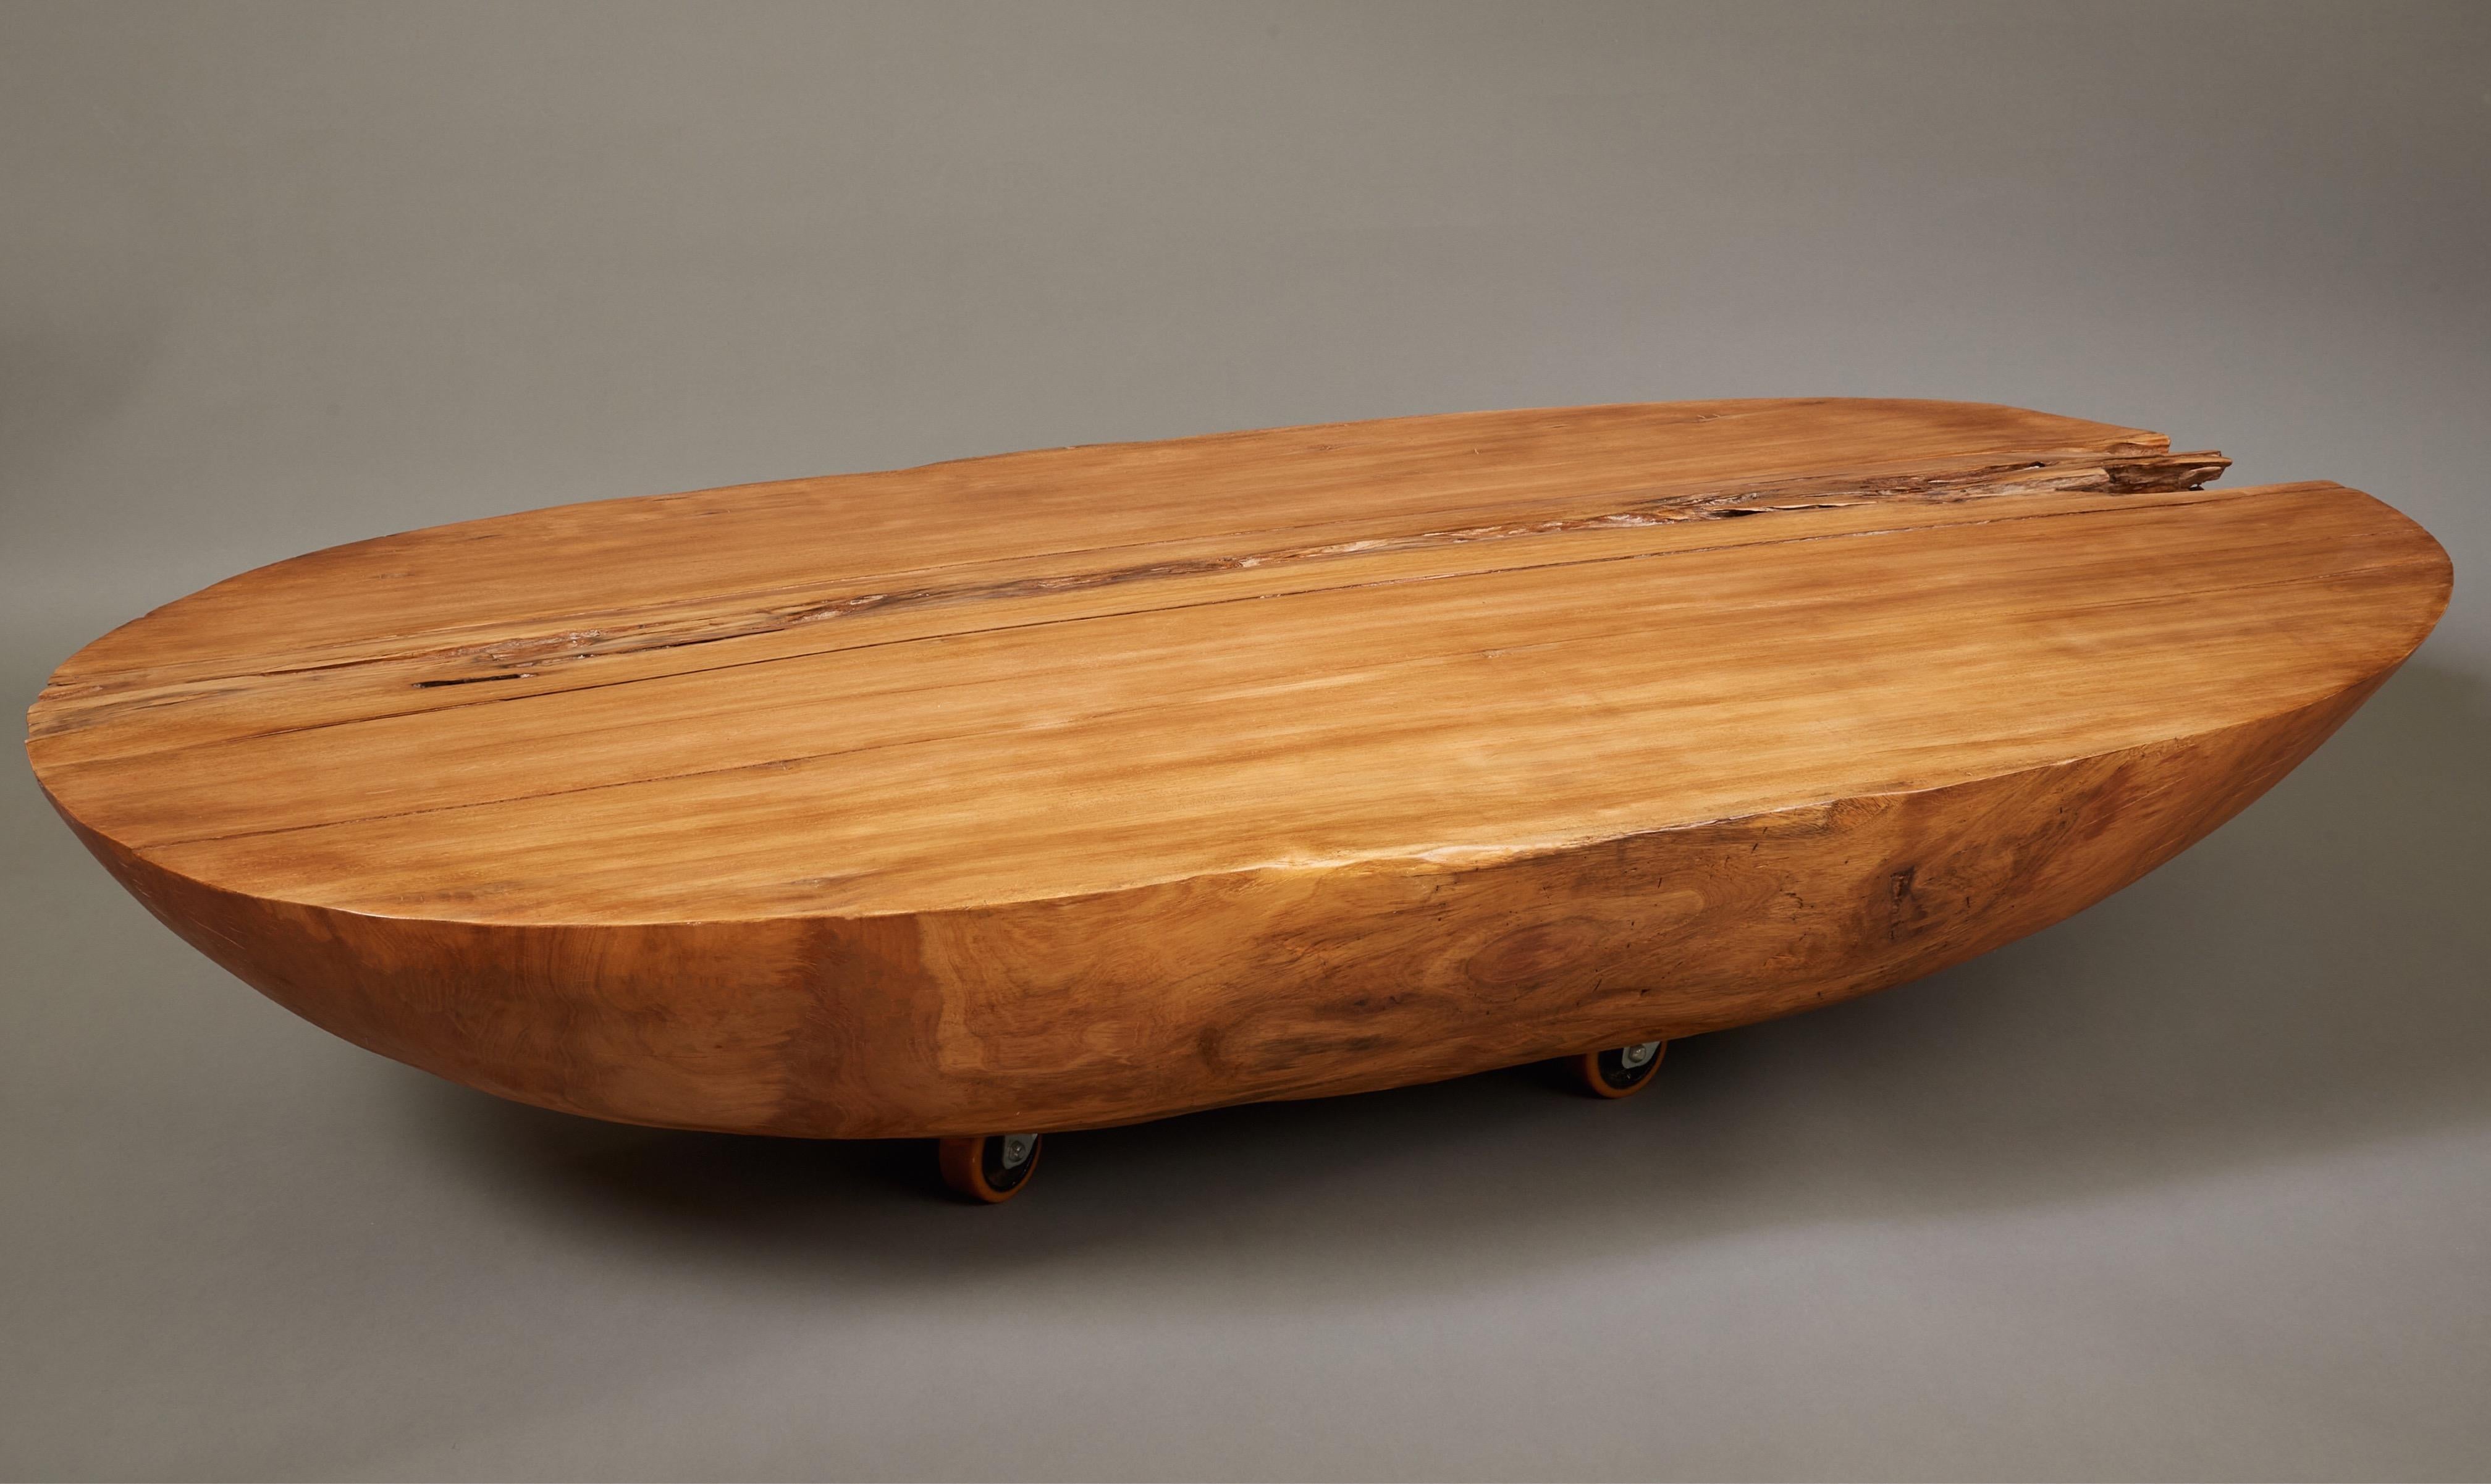 Hugo França (b. 1954)

A phenomenal, monumental oval coffee table by Brazilian woodworker Hugo França, in reclaimed pequi wood raised on four casters. Expertly crafted from a massive slab of Brazilian hardwood, salvaged from old-growth trees felled